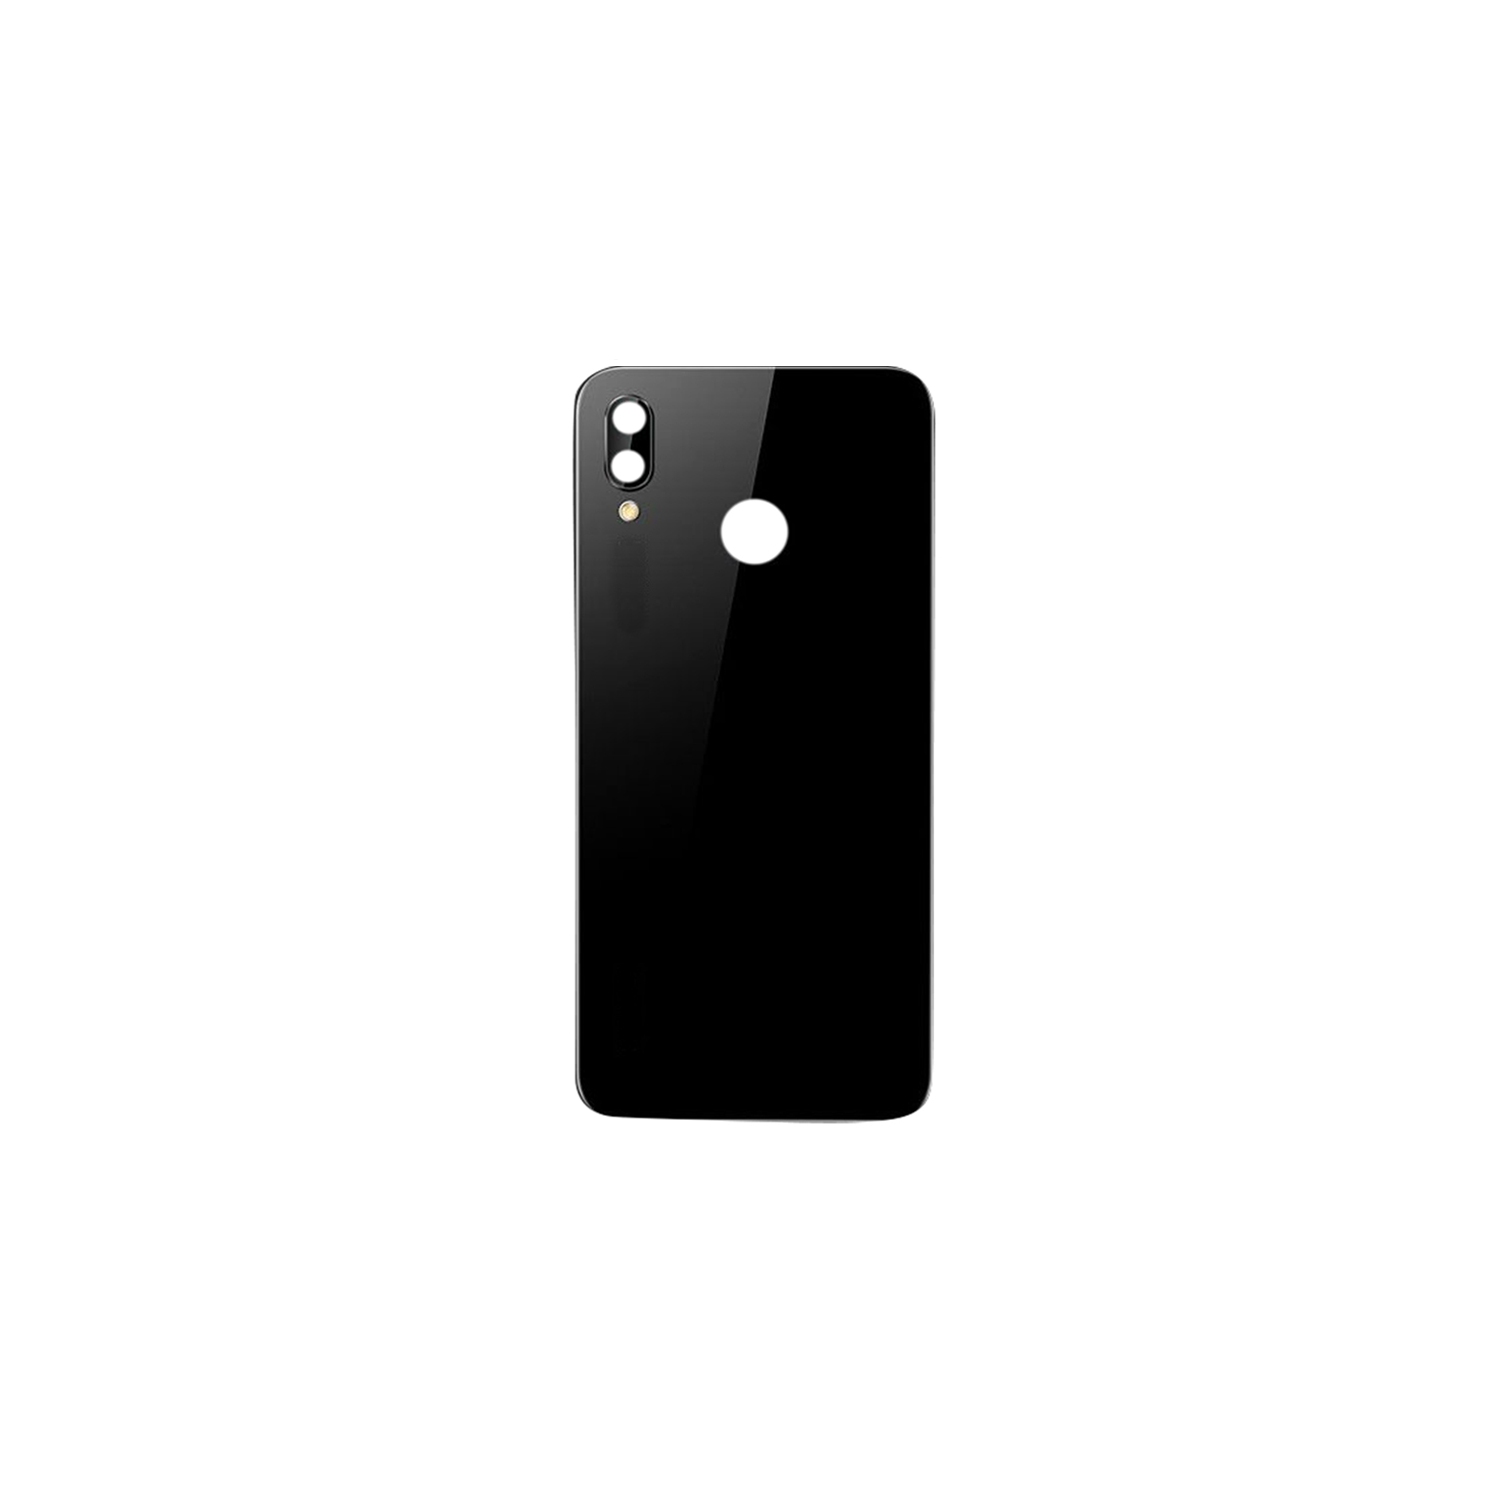 Replacement Battery Back Housing Cover With Camera Lens For Huawei P20 Lite - Black